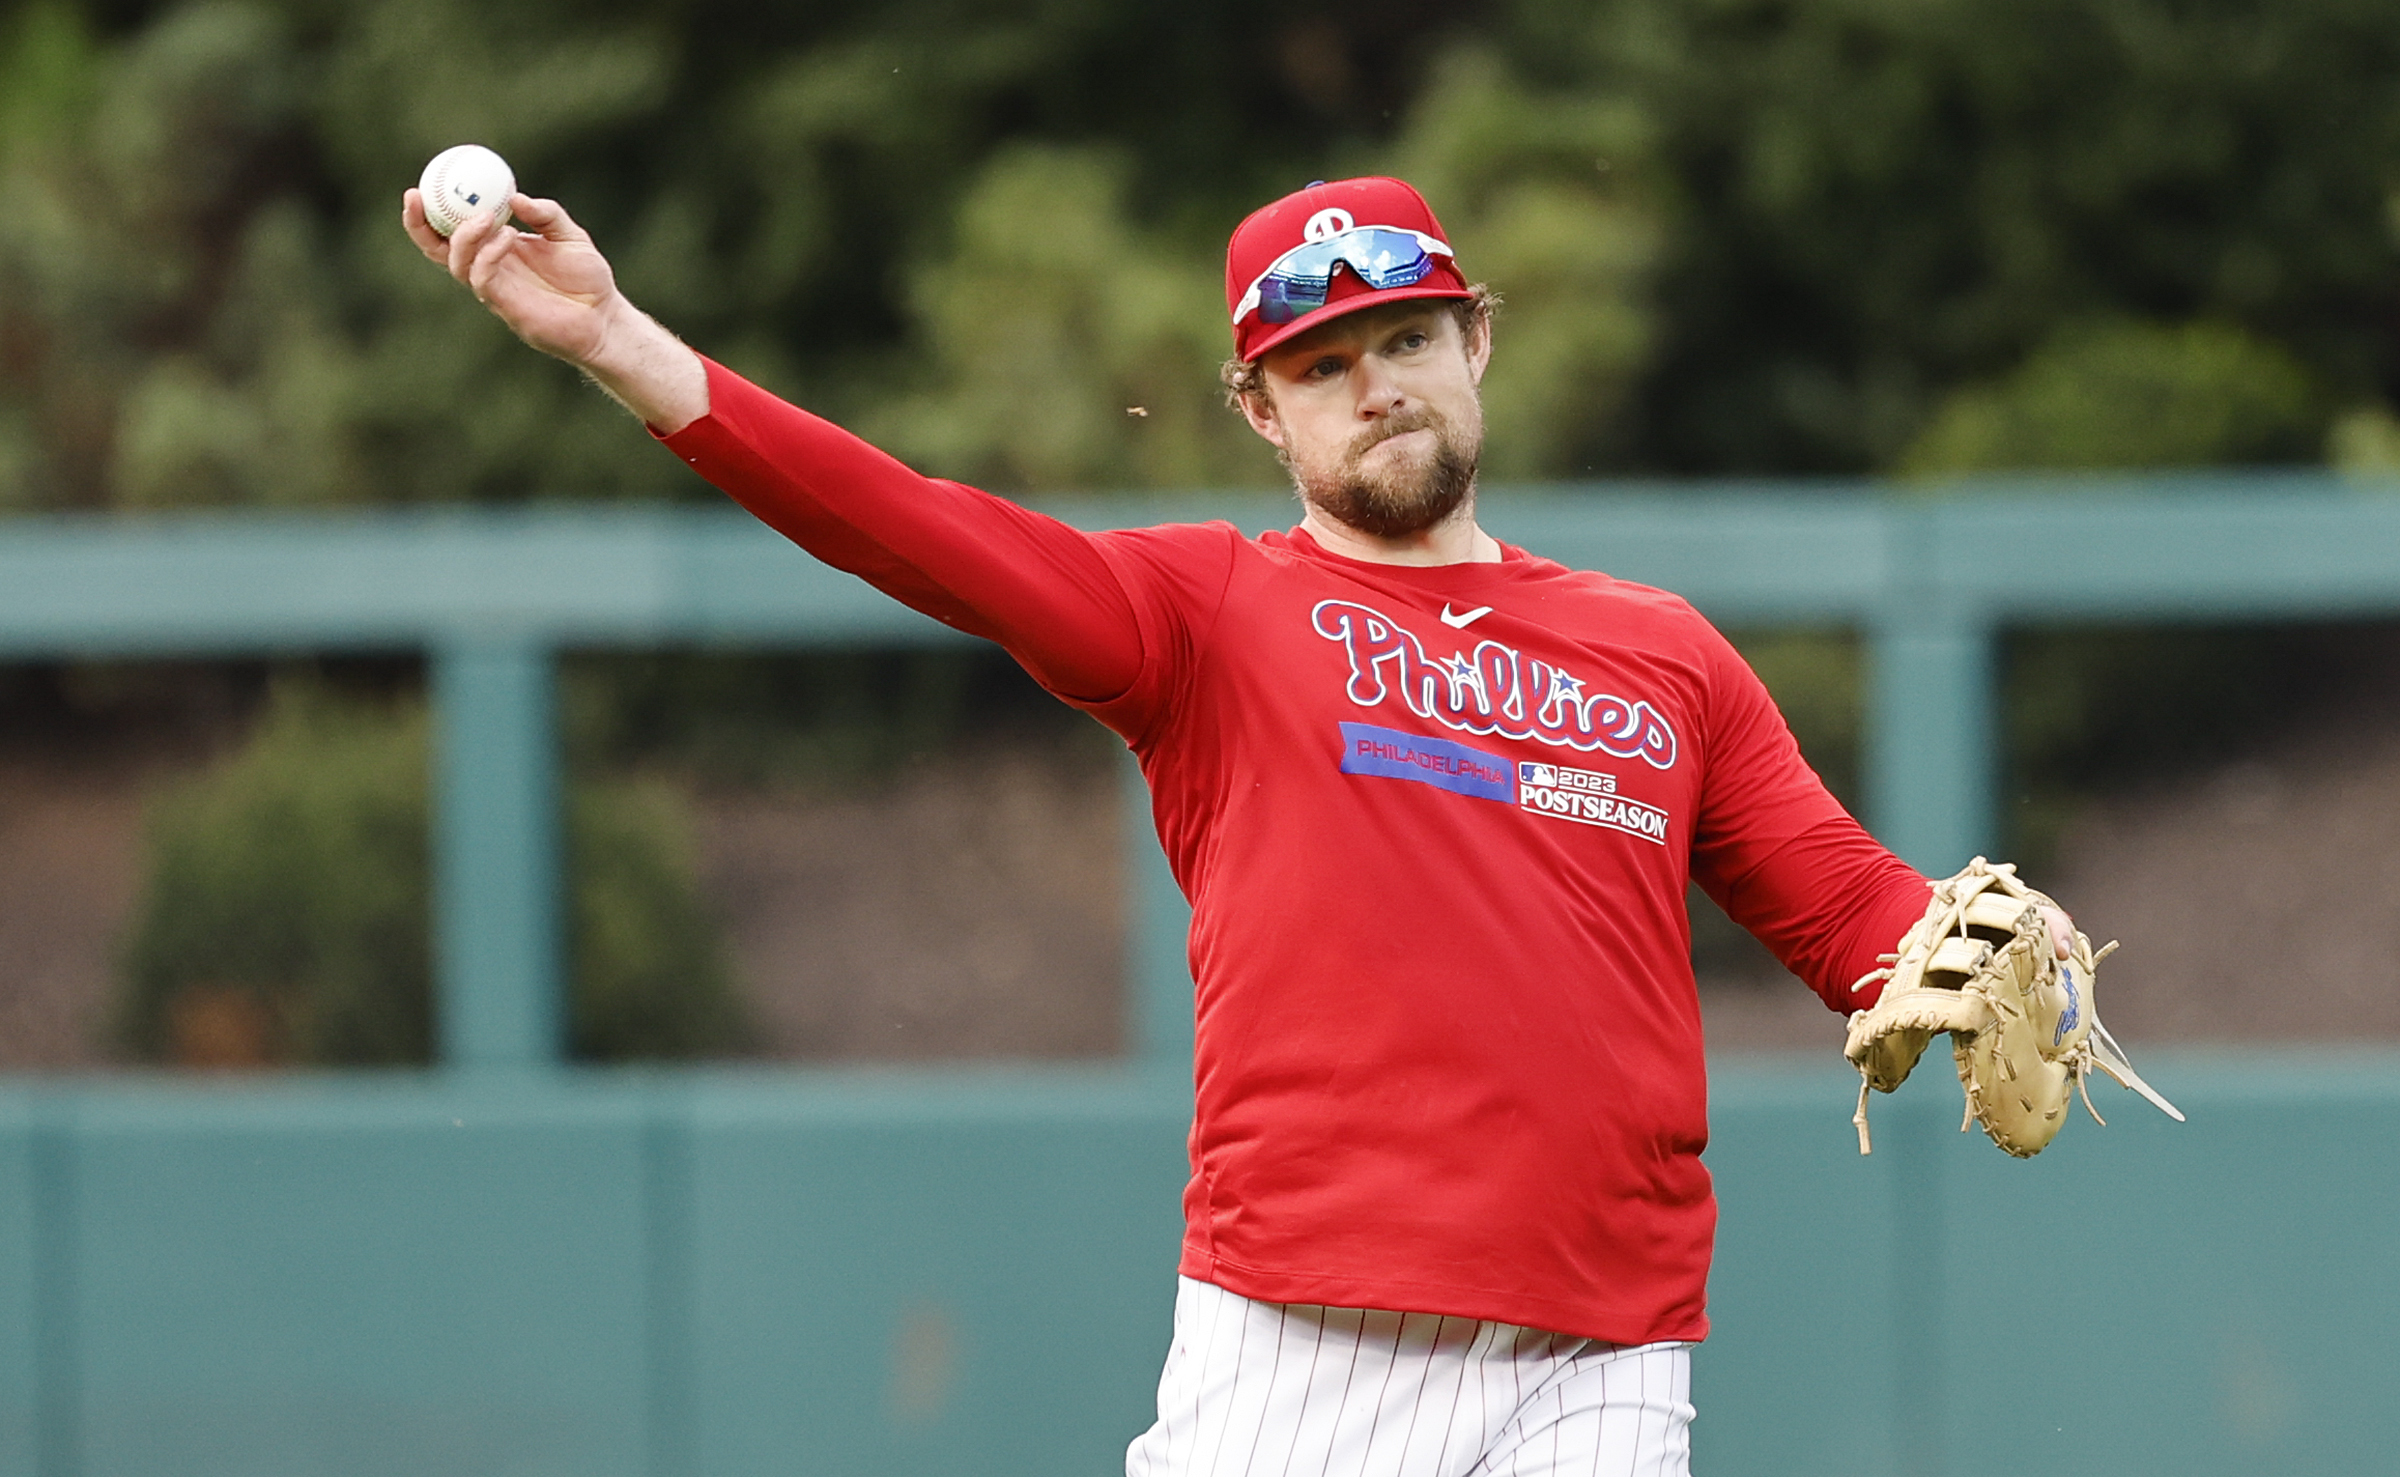 Photos from the Phillies' first week of summer camp